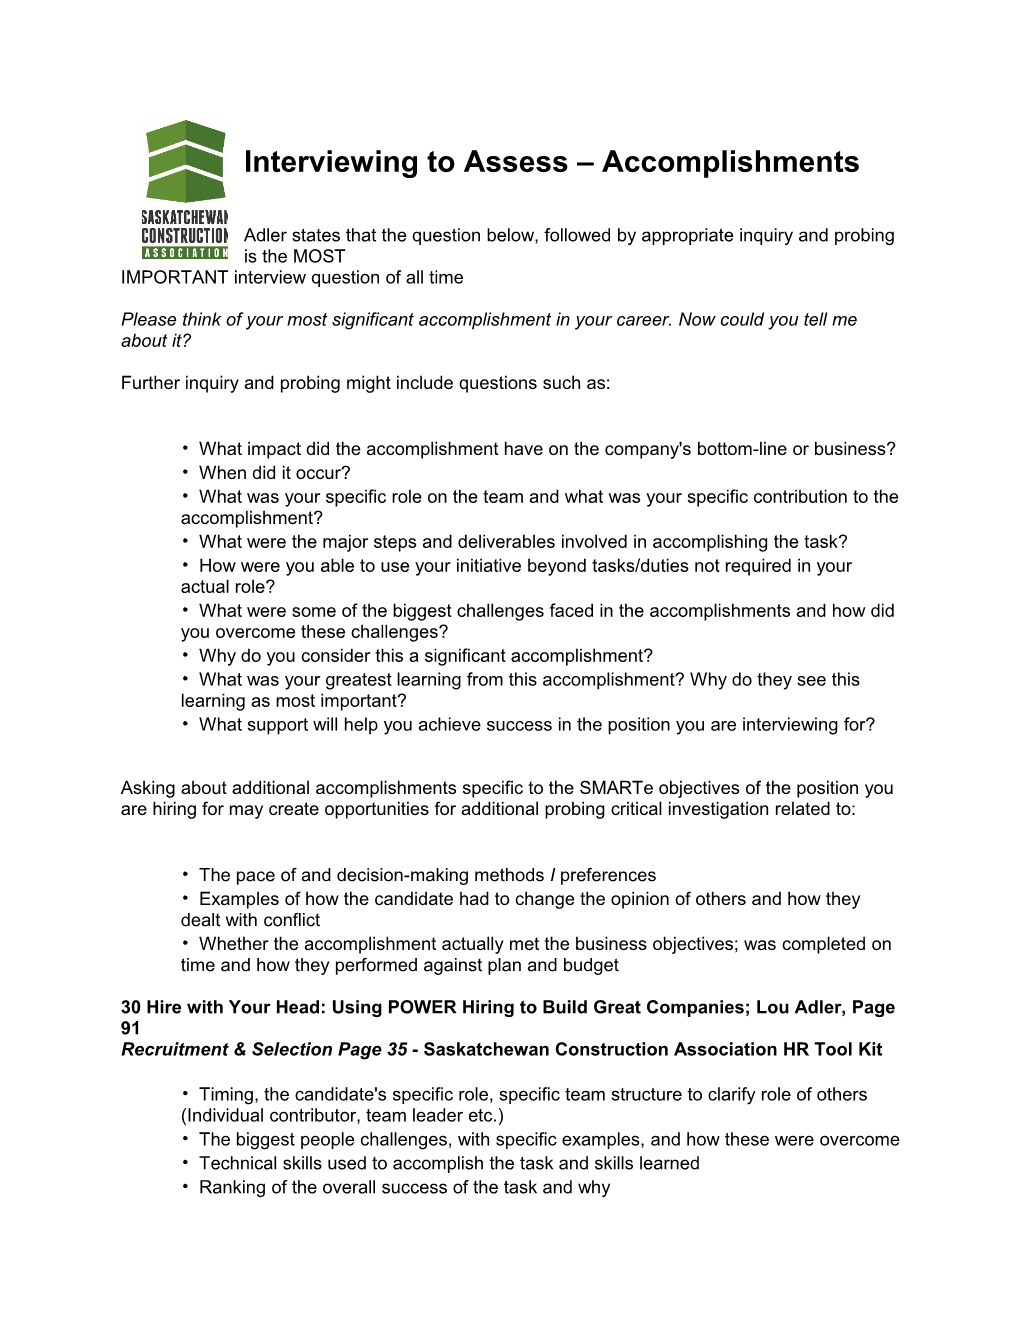 Interviewing to Assess Accomplishments